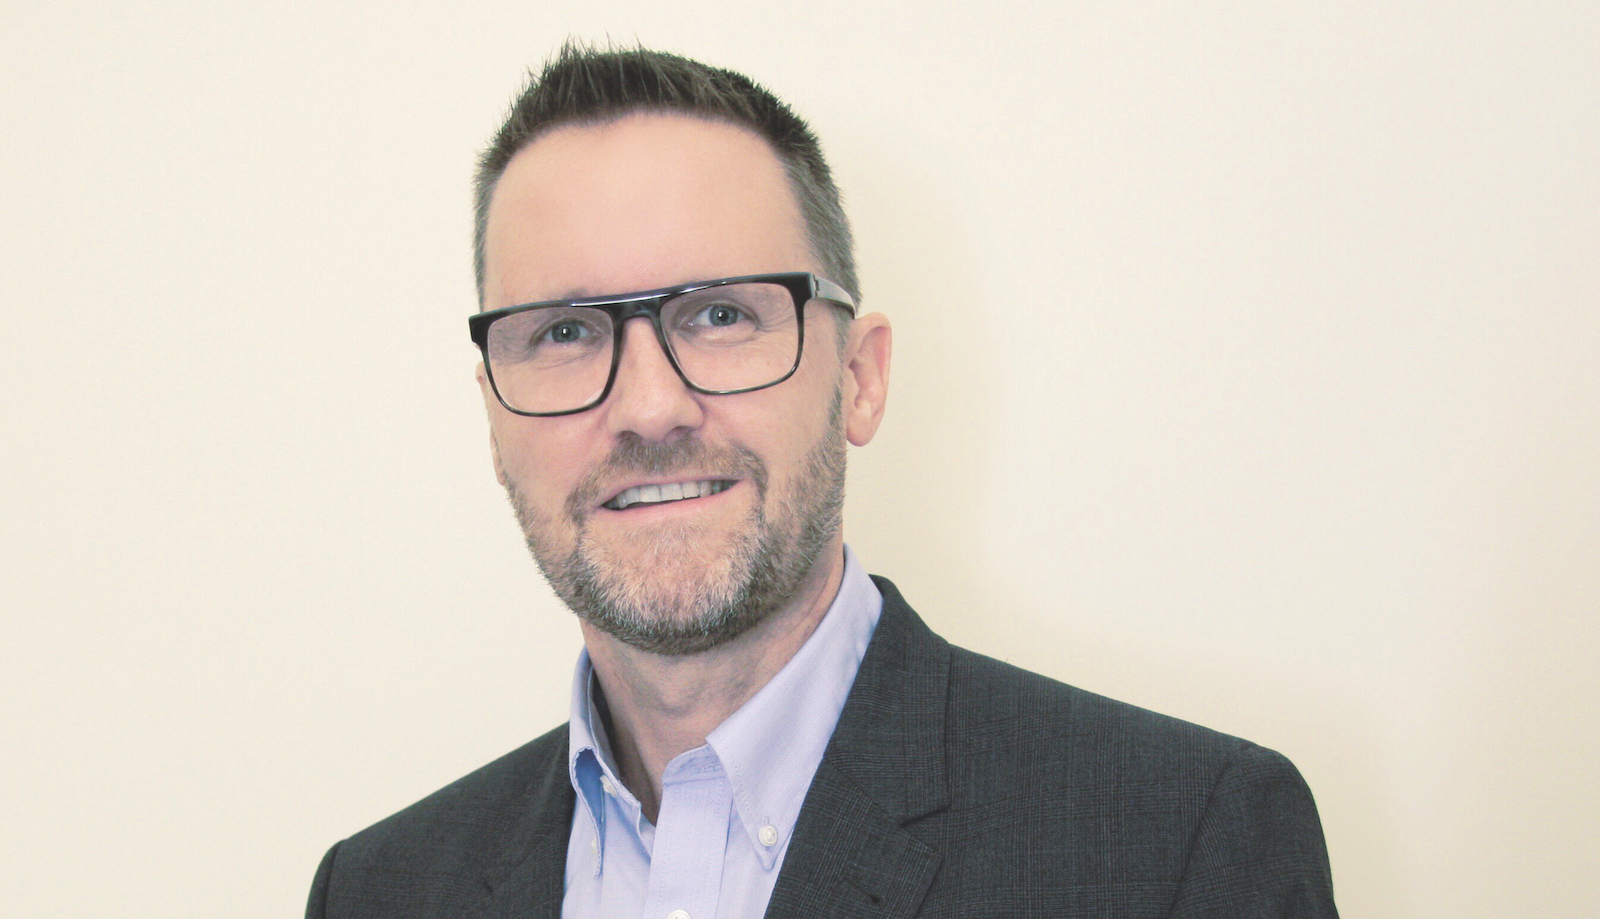 Paul Boldy FCIOB is the new Middle East managing director of RLA Global, an advisory and management consultancy to the leisure and hospitality sector